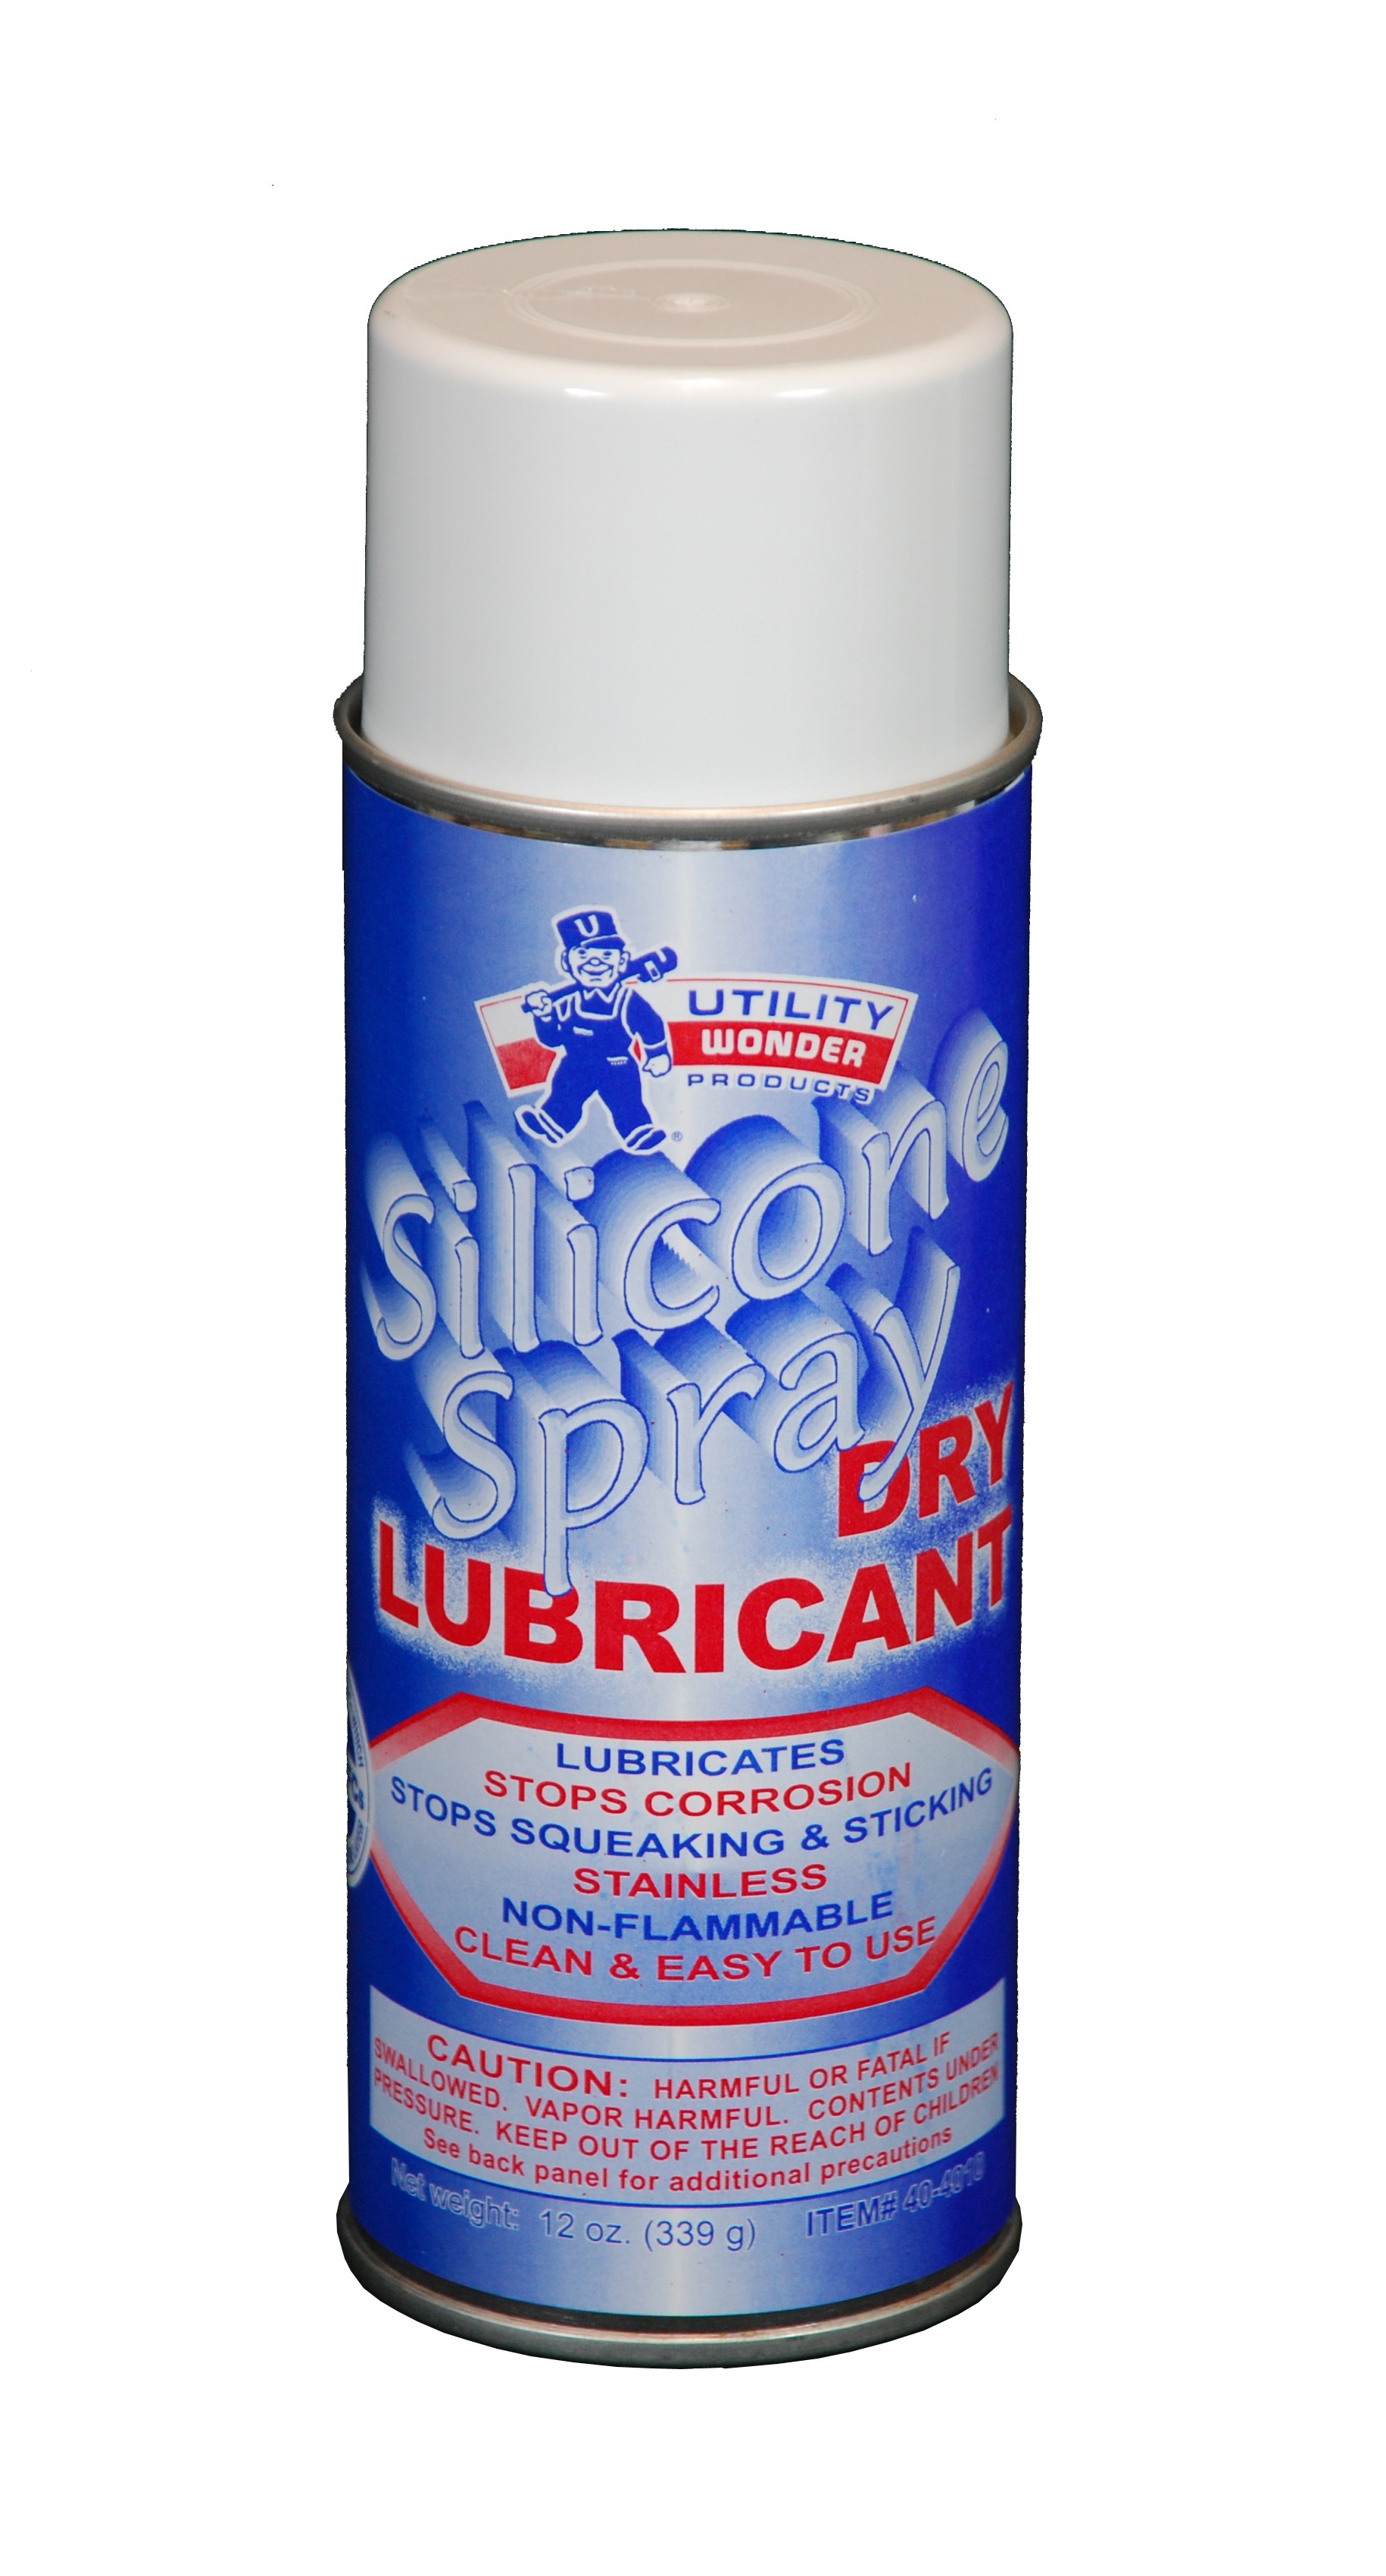 SILICONE SPRAY DRY LUBRICANT - Cutting, Penetrating, & Lubricating Fluids -  Plumbing